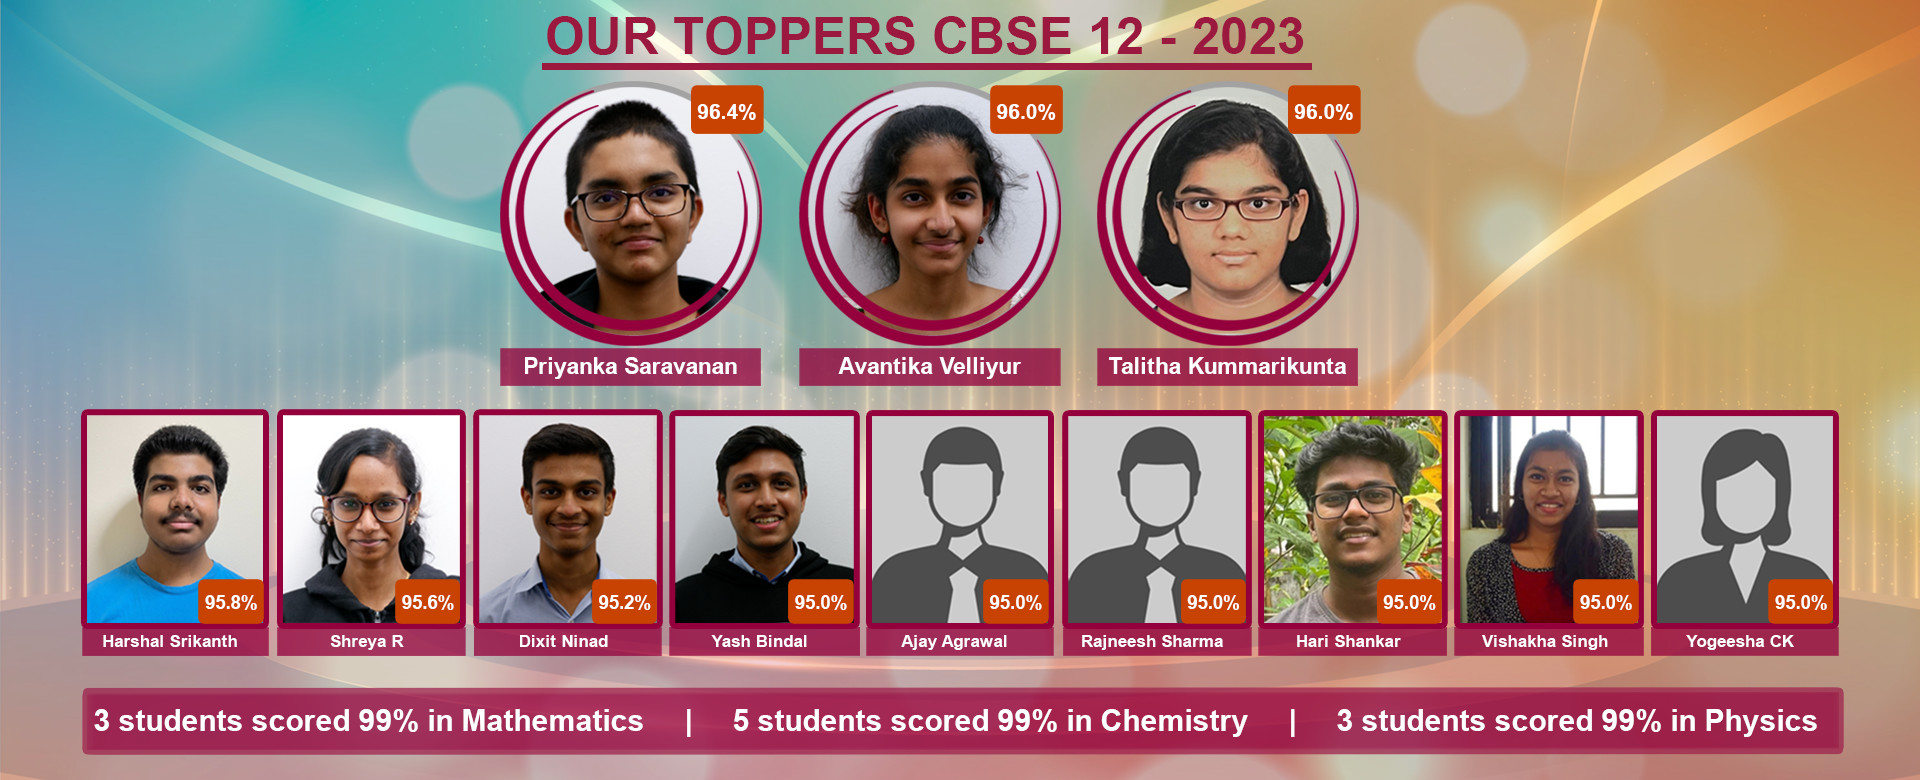 Our CBSE 12 Toppers 2023